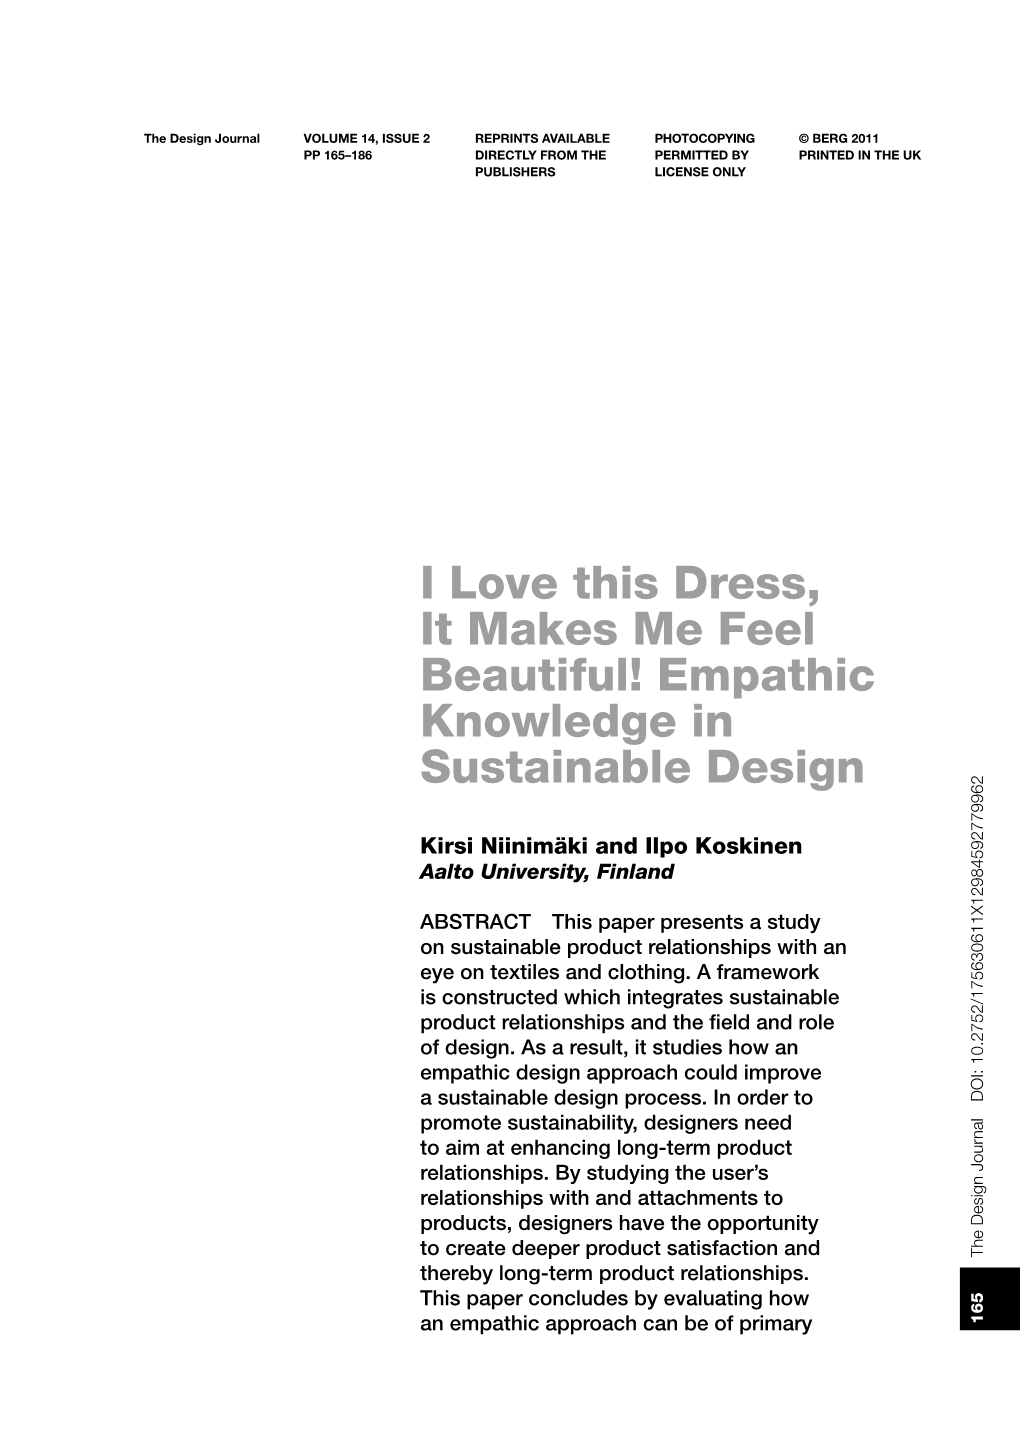 Empathic Knowledge in Sustainable Design